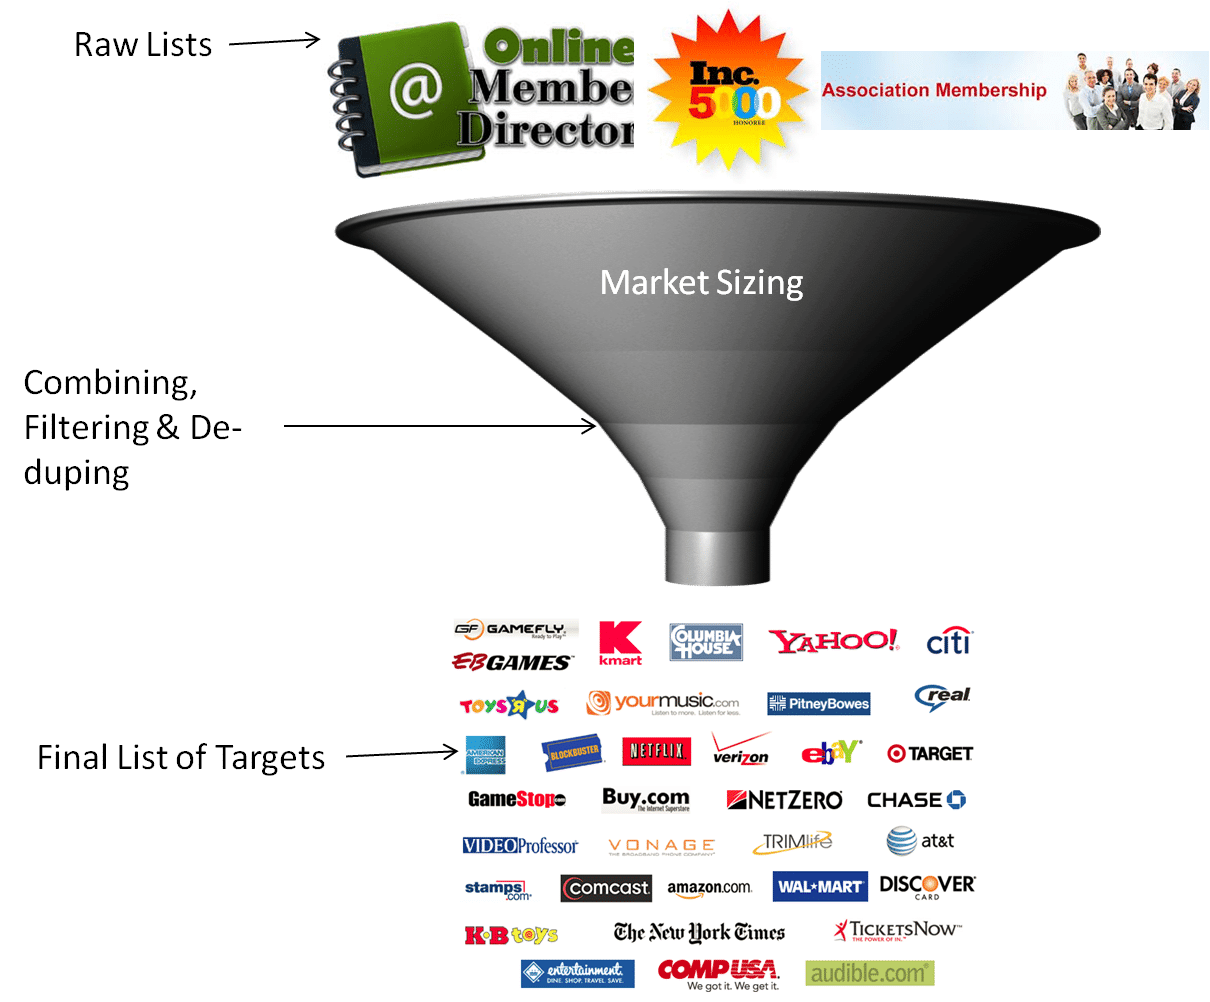 https://openviewpartners.com/wp-content/uploads/2016/10/Directory-Approach-market-Sizing-08.16.2013-2.png